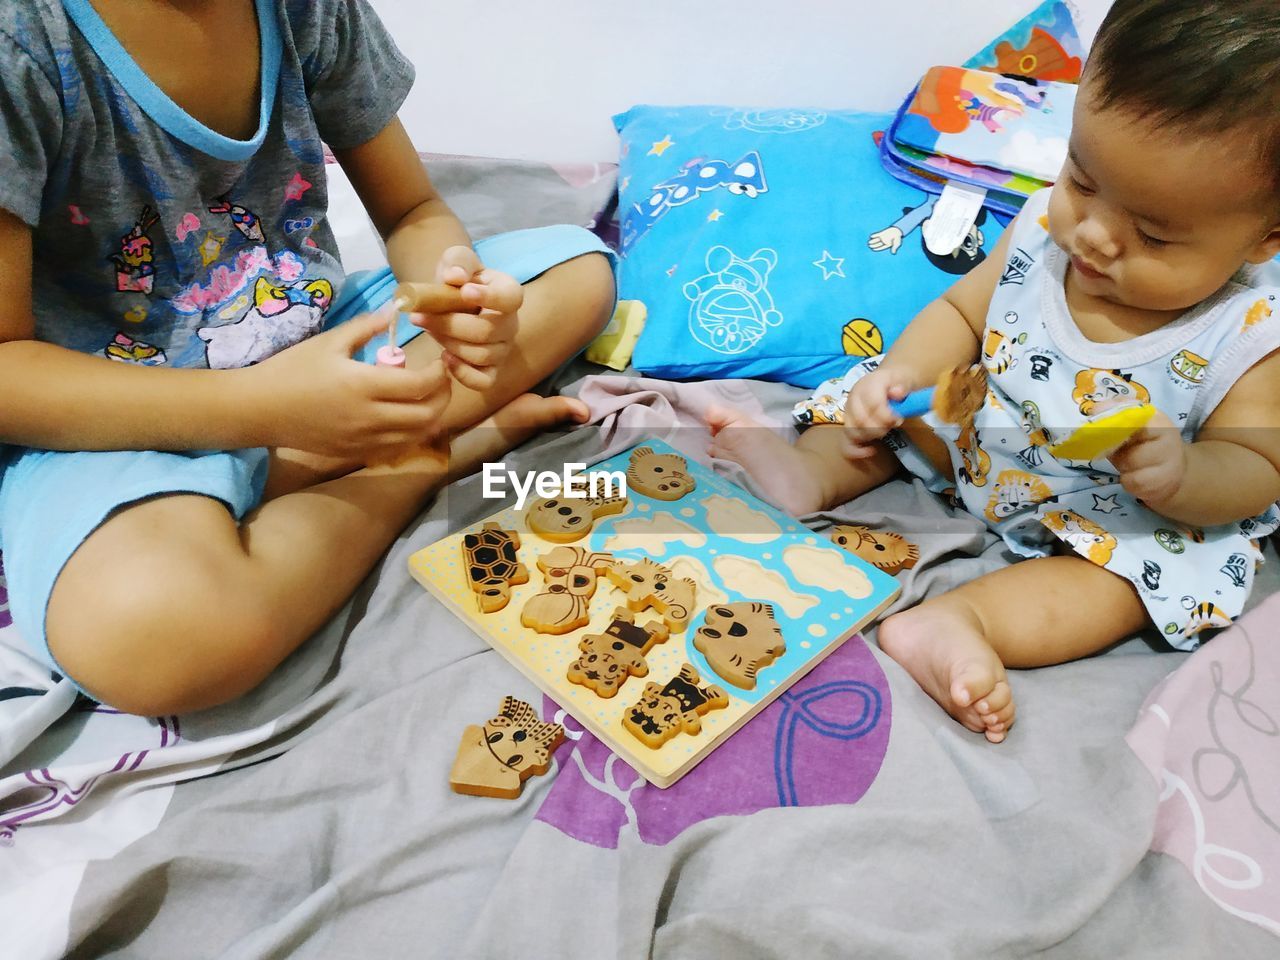 Siblings playing with toys on bed at home